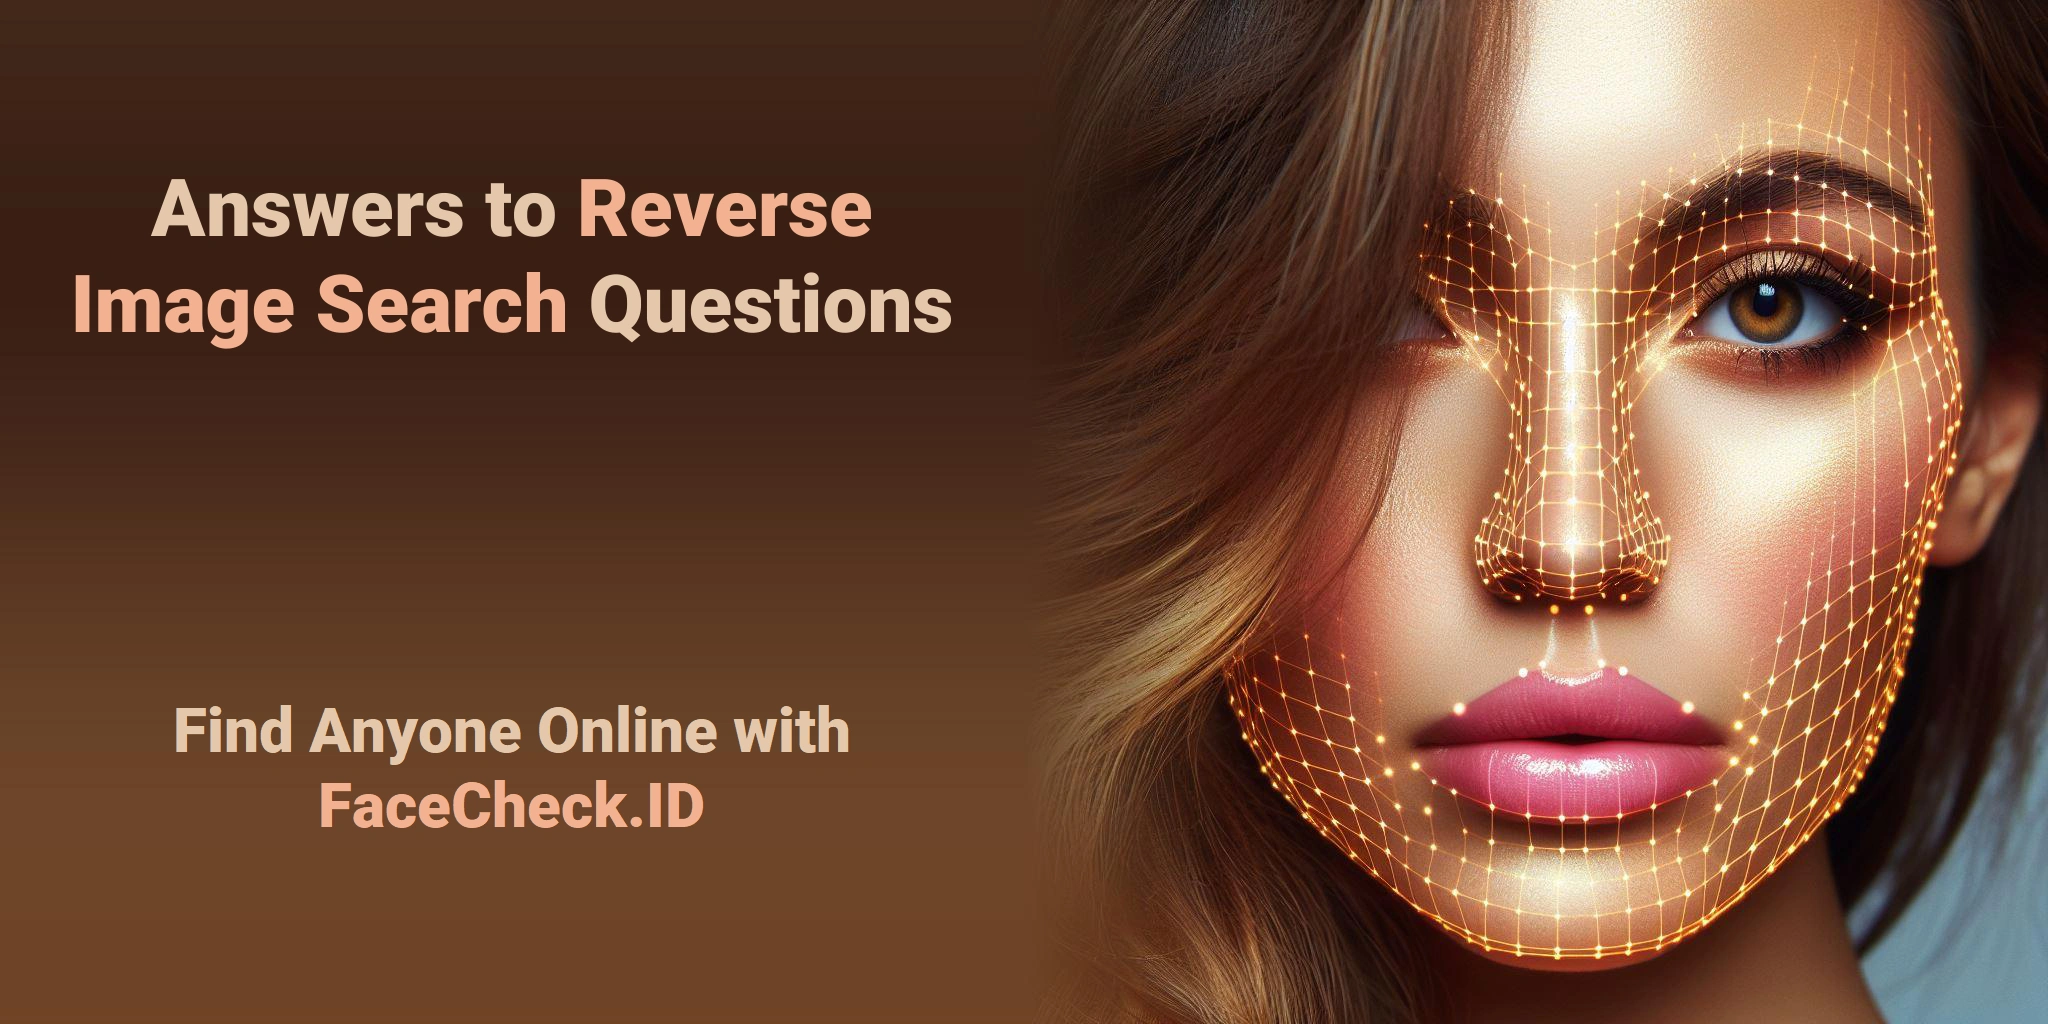 Answers to Reverse Image Search Questions Find Anyone Online with FaceCheck.ID